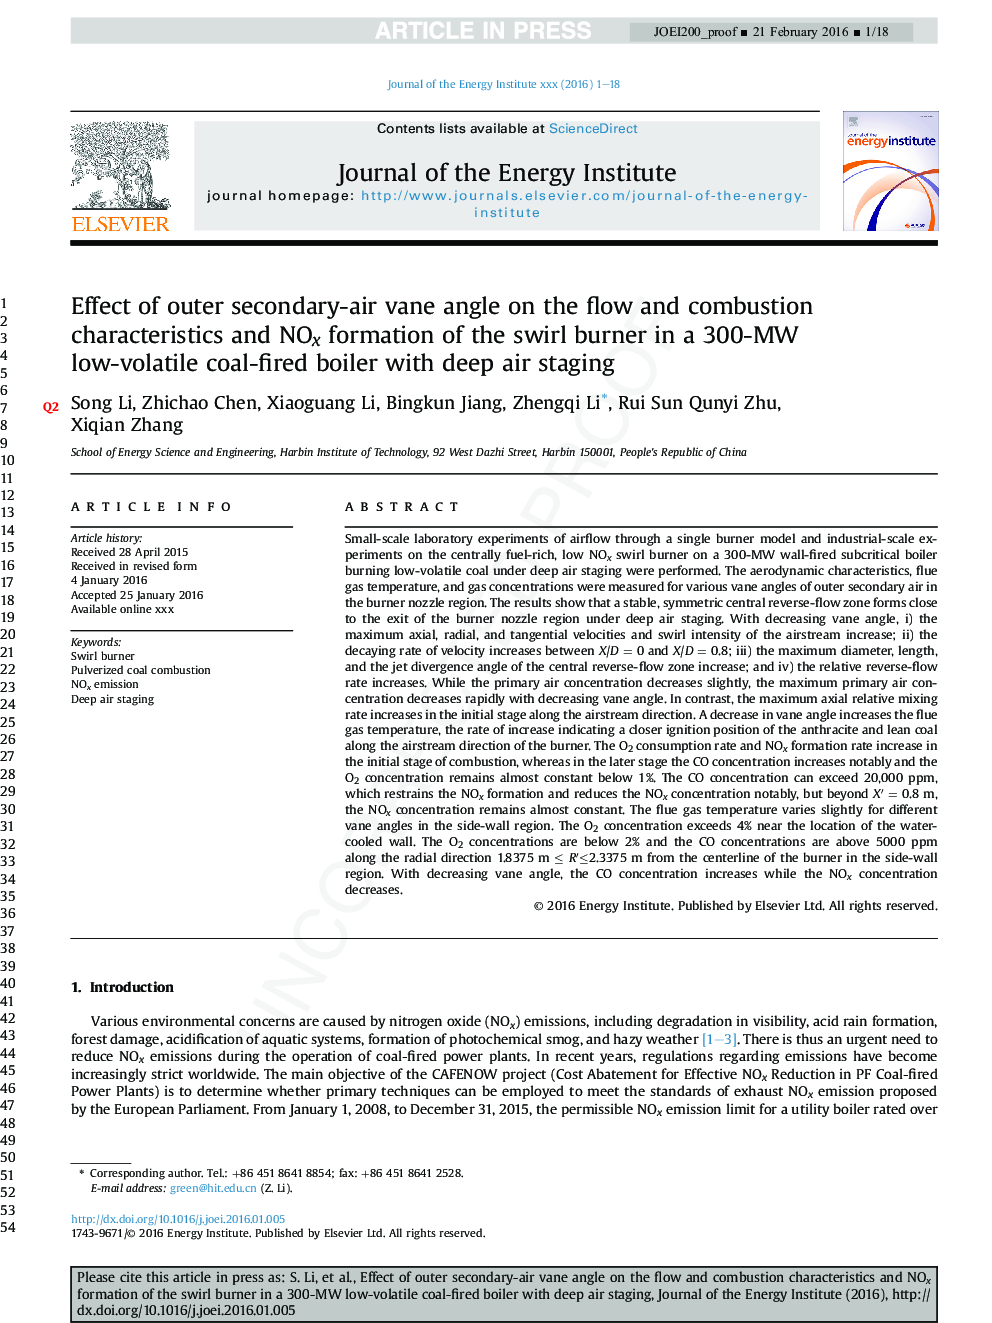 Effect of outer secondary-air vane angle on the flow and combustion characteristics and NOx formation of the swirl burner in a 300-MW low-volatile coal-fired boiler with deep air staging